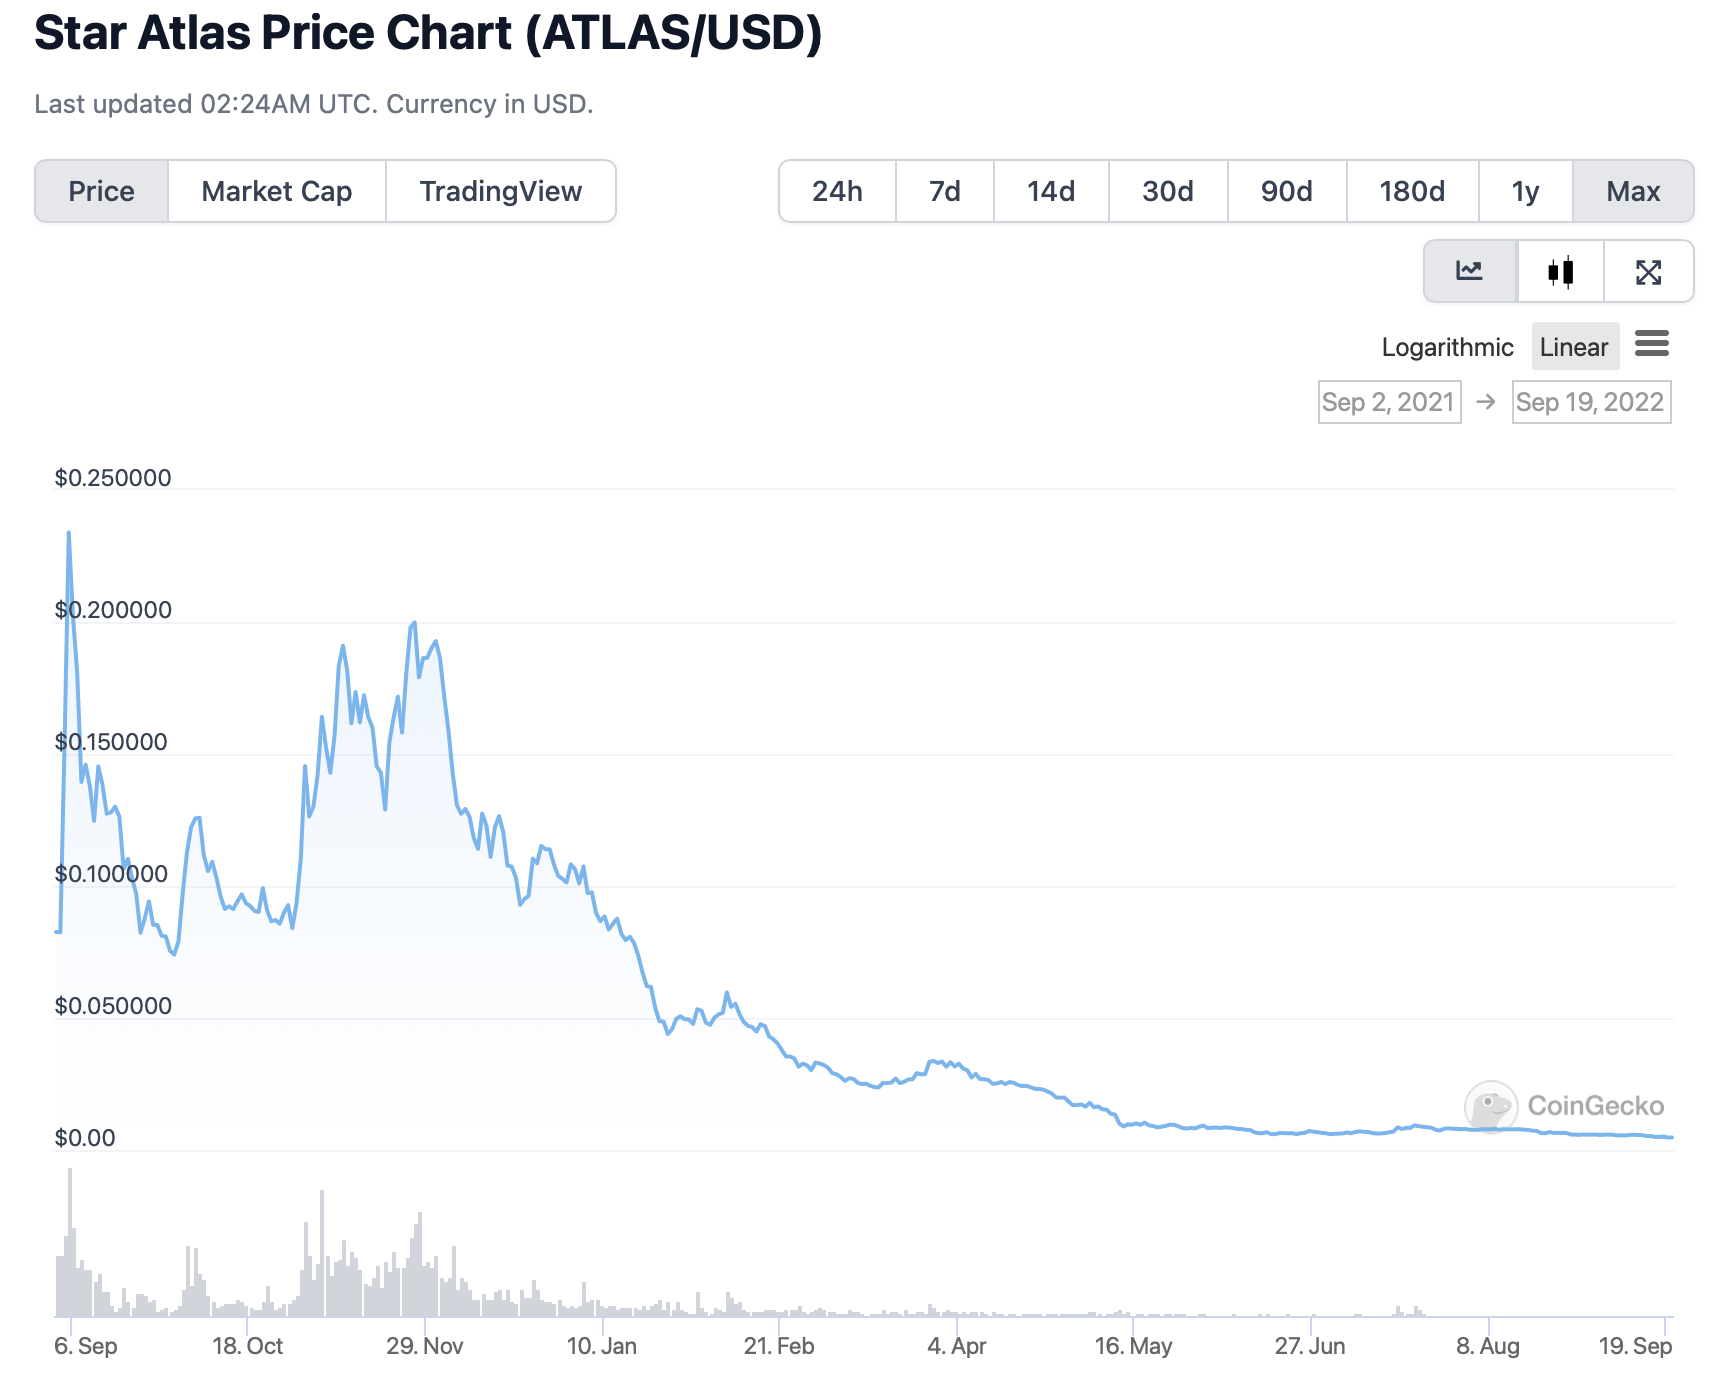 ATLAS price chart from September 2021 to 2022.